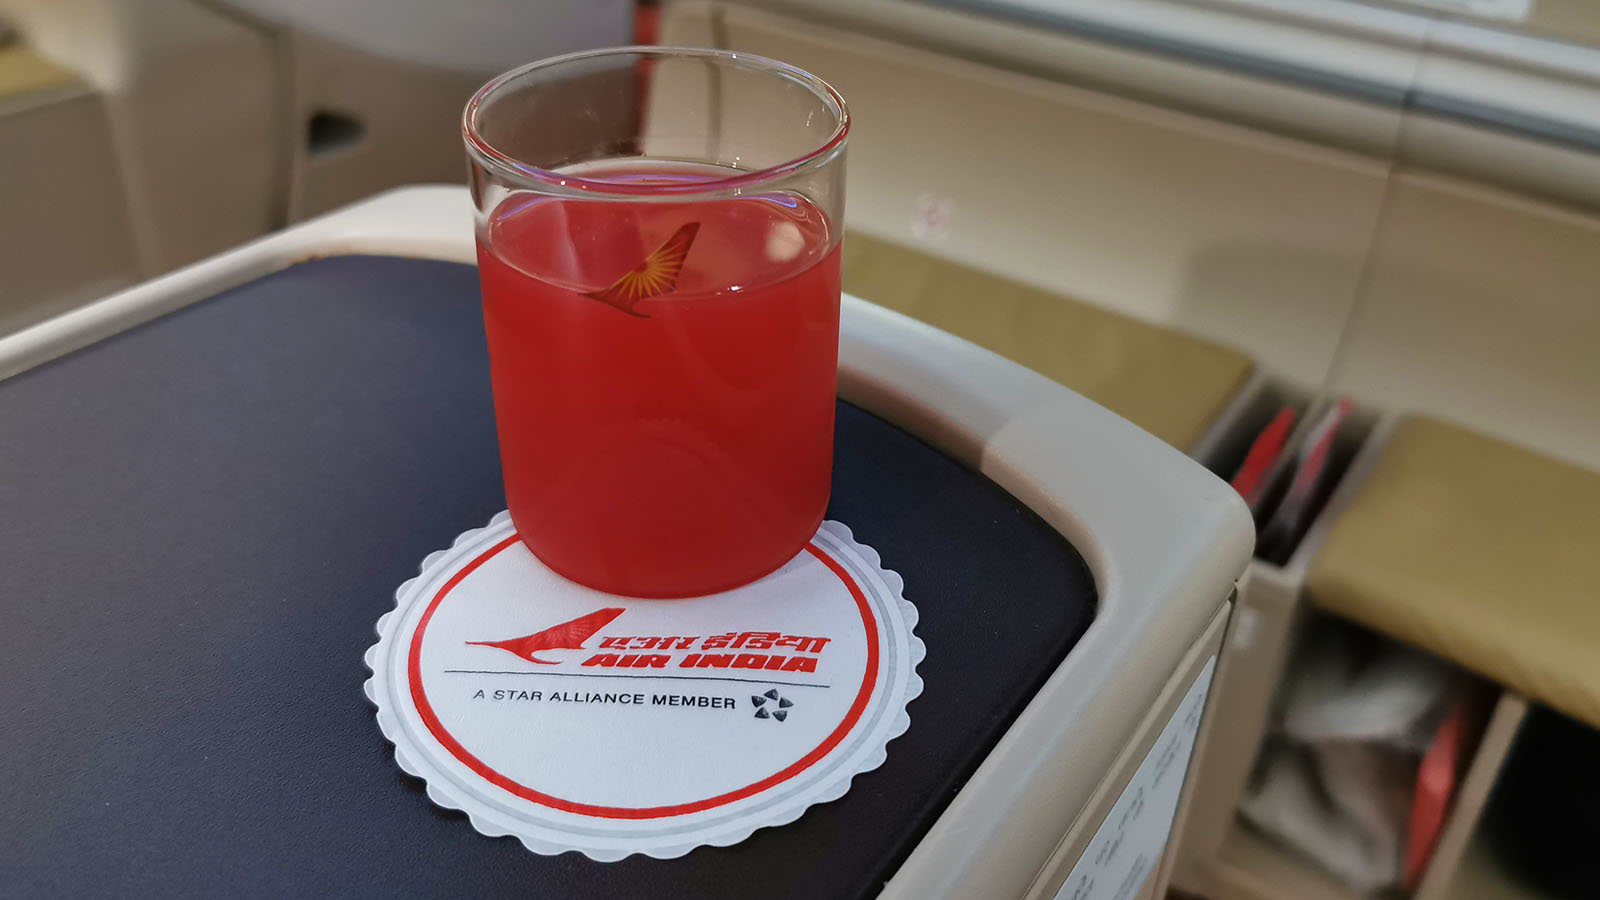 Watermelon juice in Air India's Boeing 787 Business Class